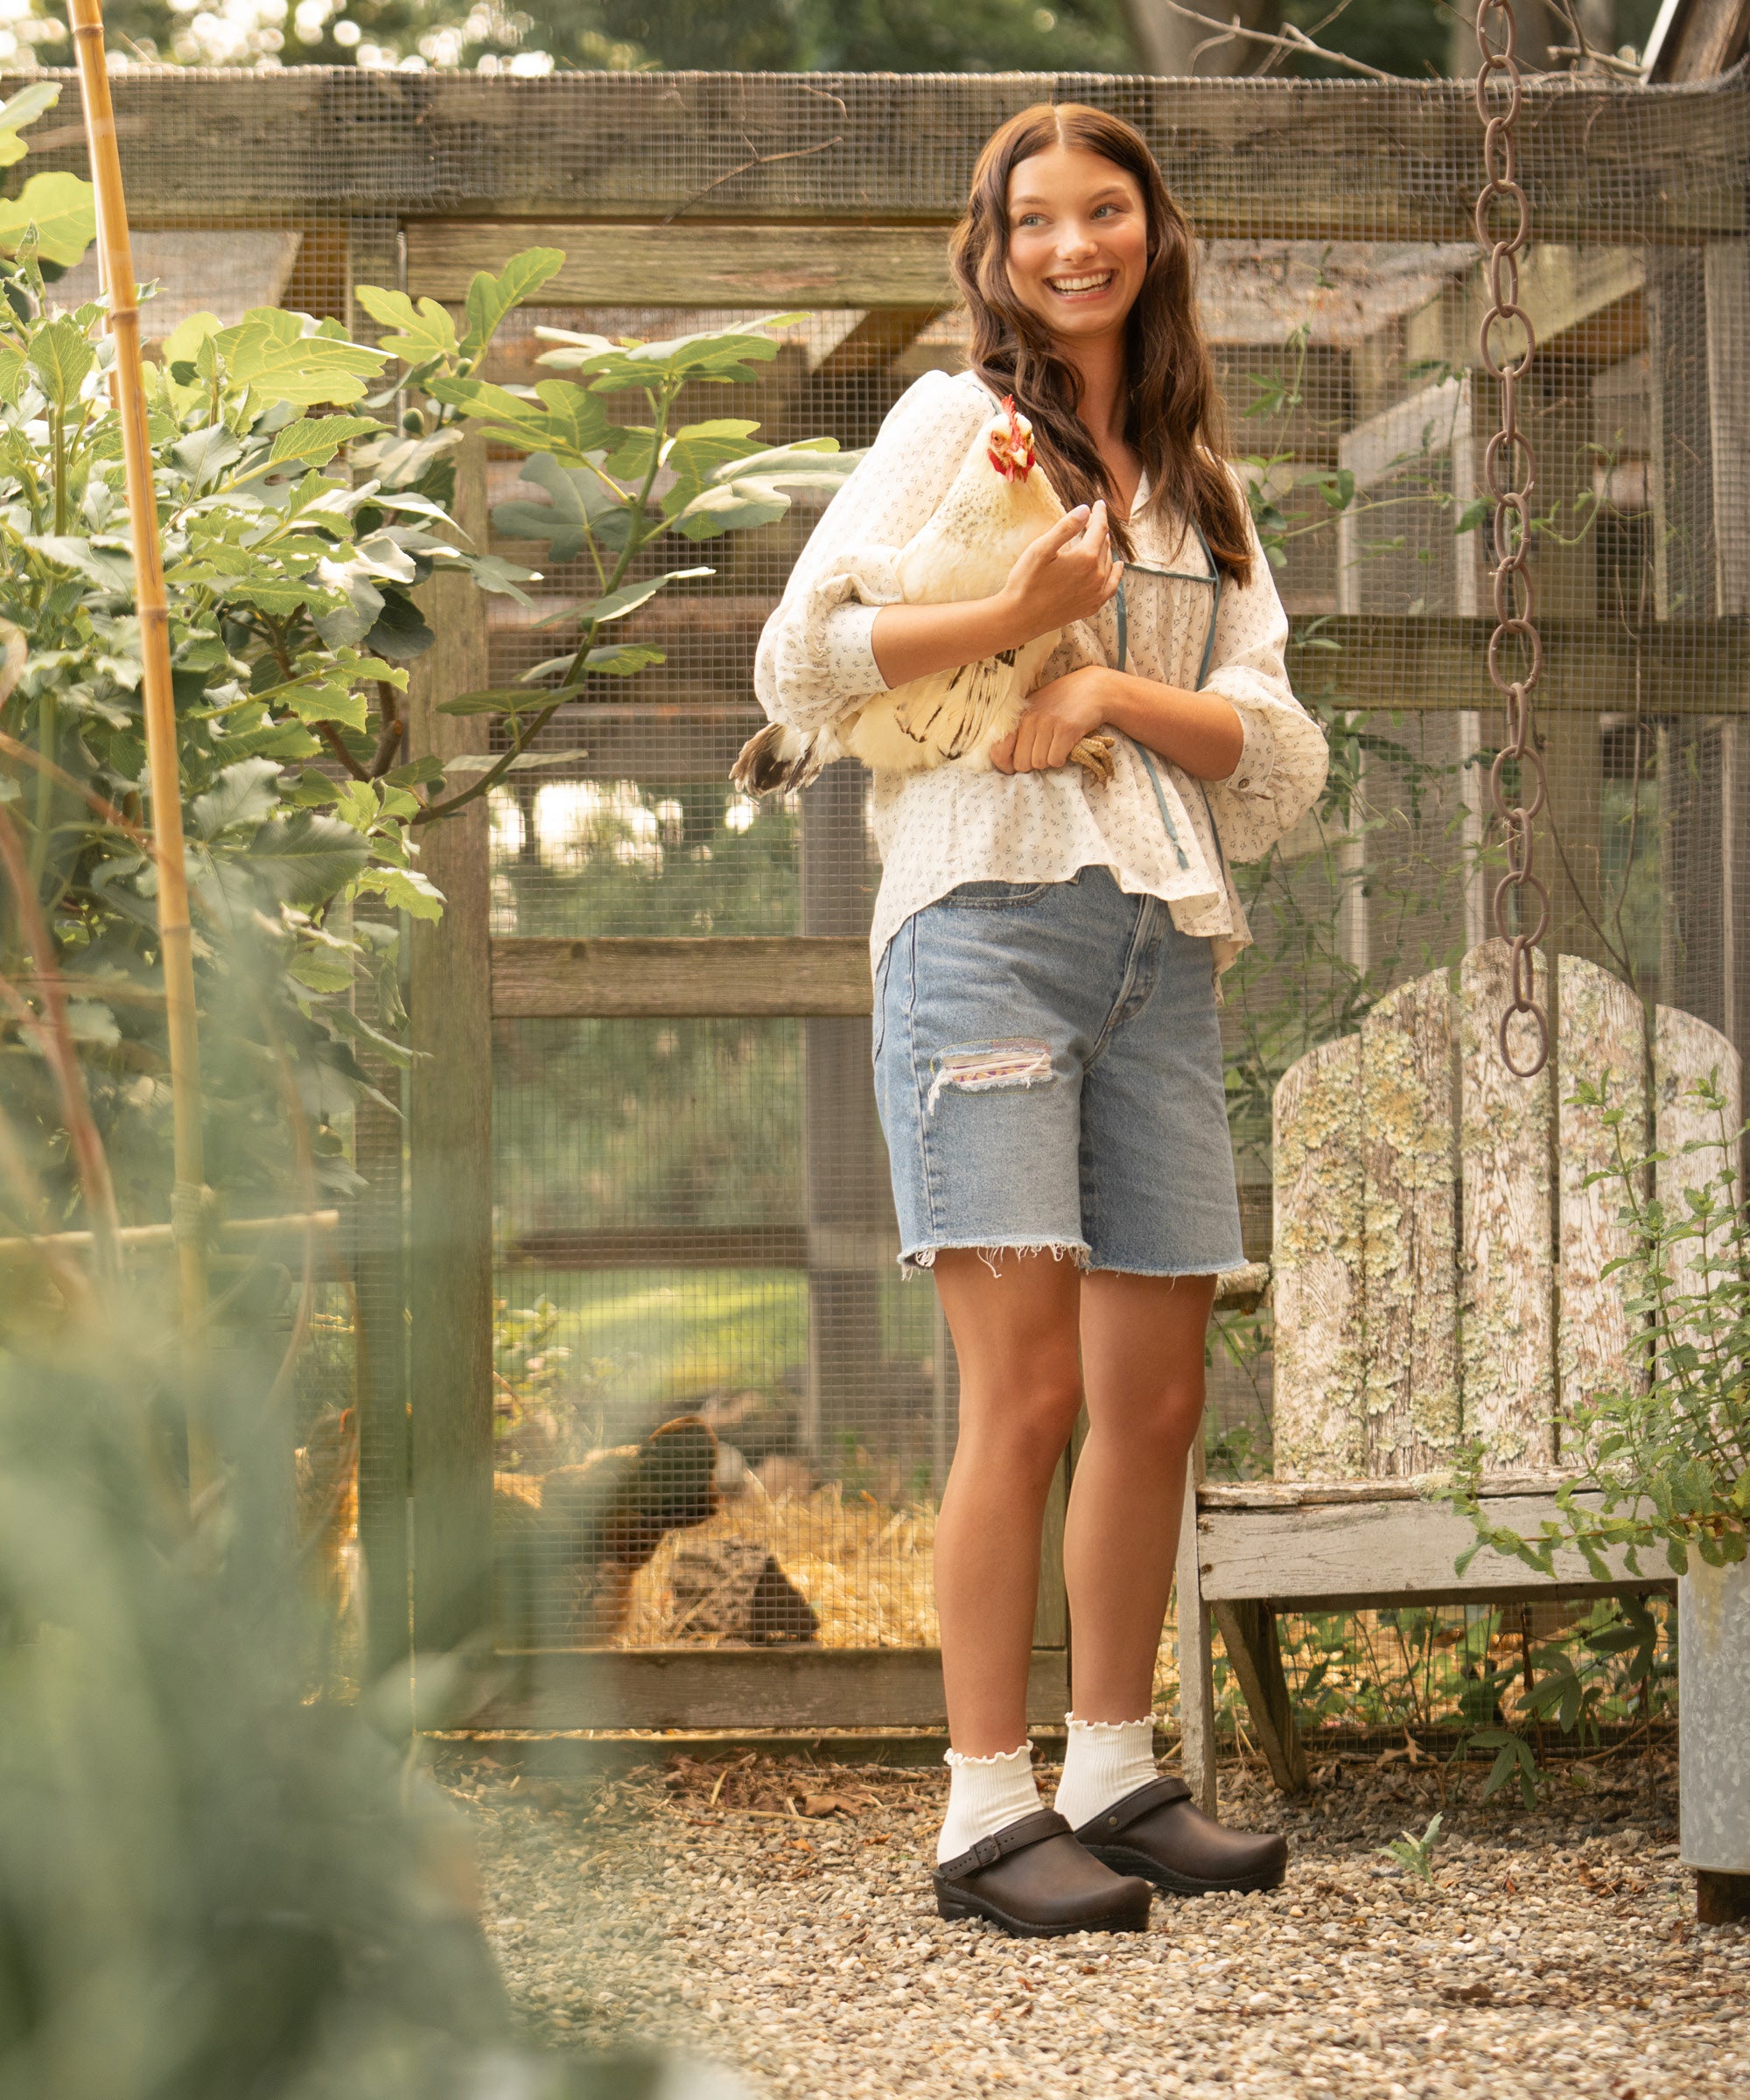 A woman dressed to care for animals wearing brown swivel strap clogs styled nicely with cute white socks.